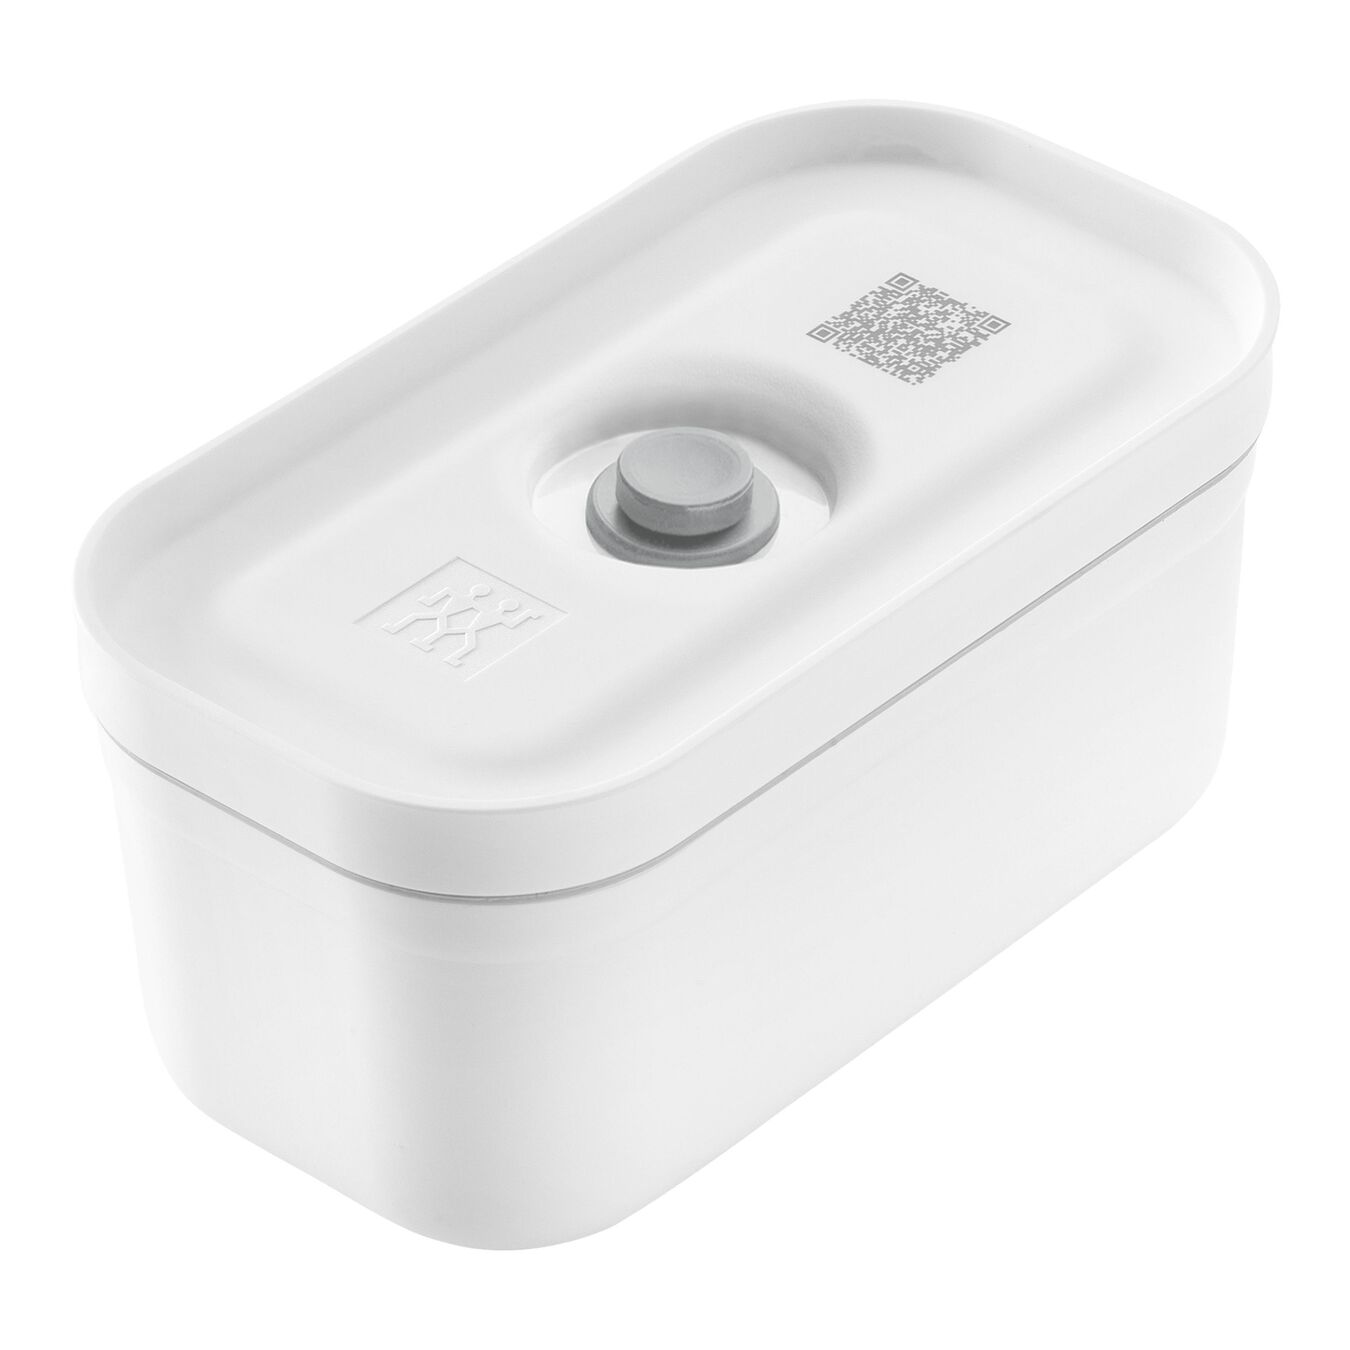 small Vacuum lunch box, plastic, white-grey,,large 1